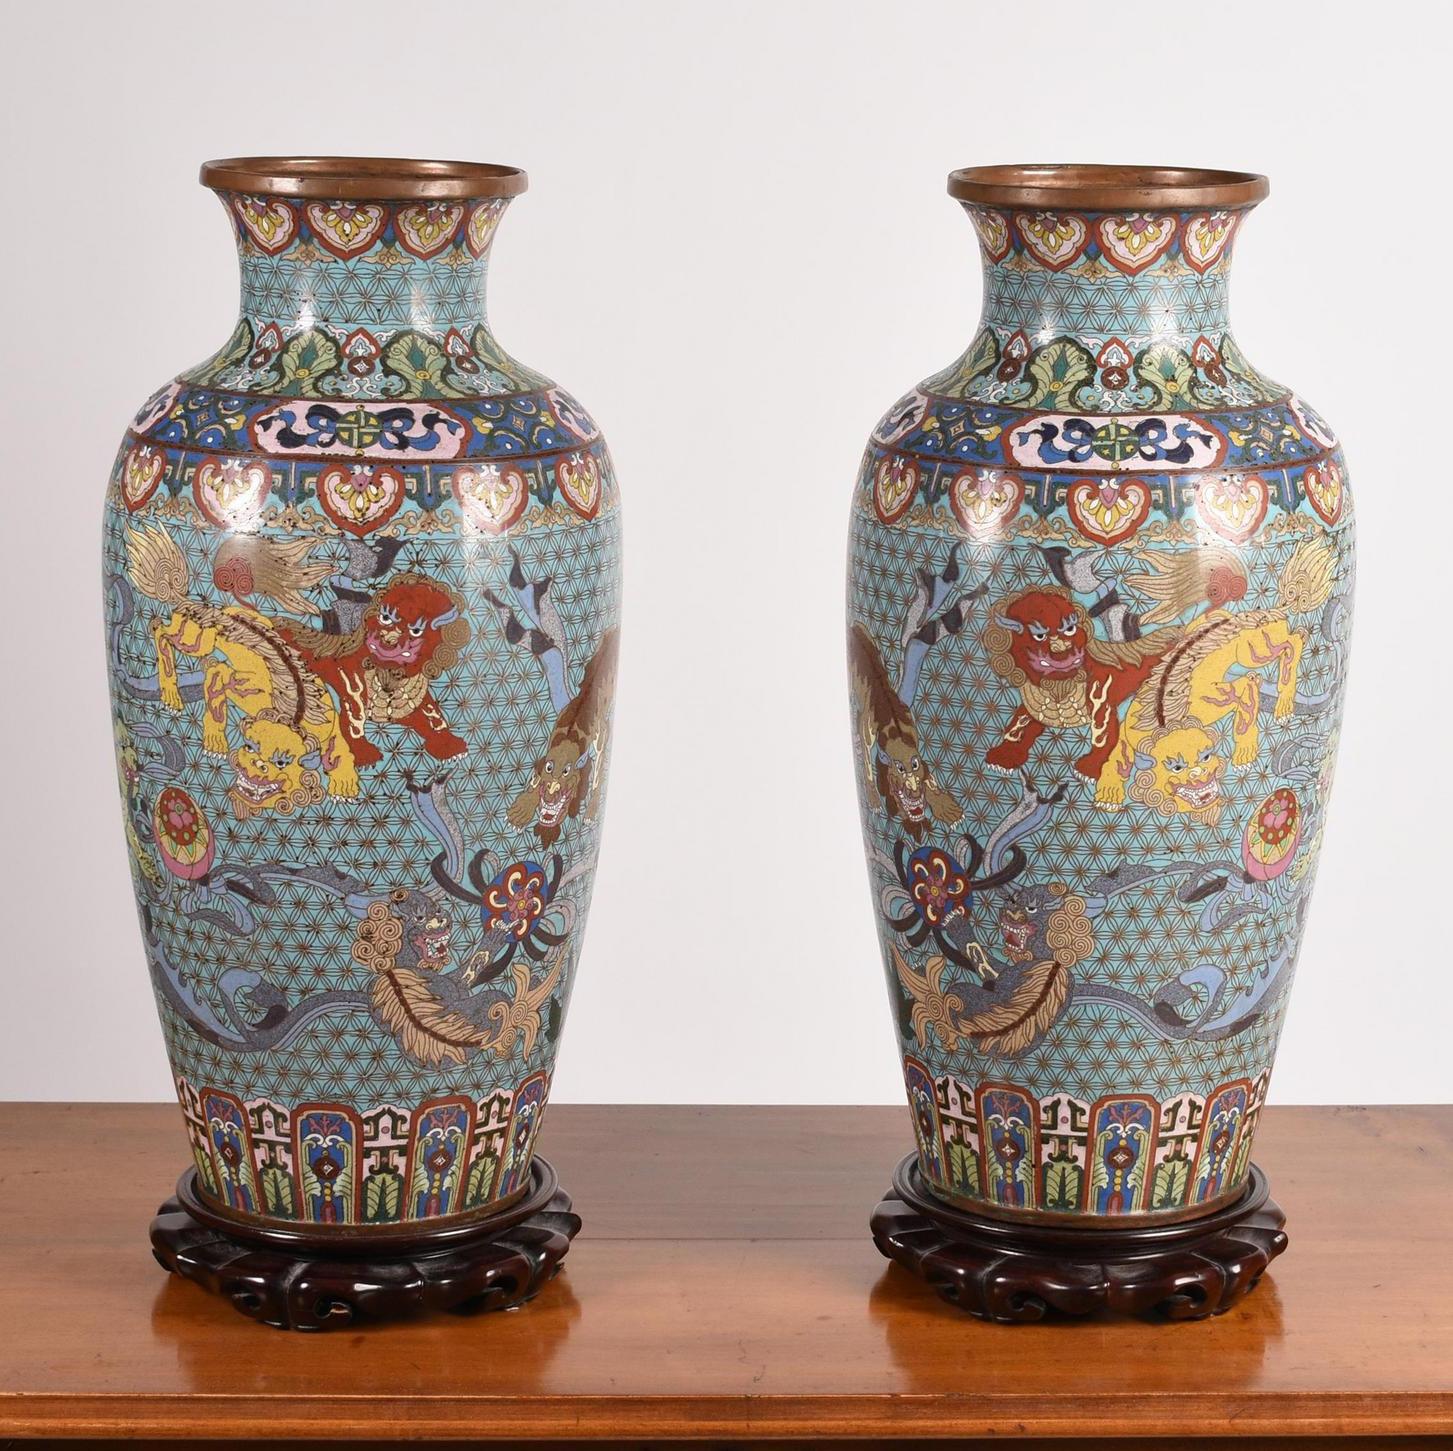 Pair of large and very fine quality unusual Chinese Cloisonne Vases with foo dog motif on rosewood stands. Vases 20 height, 22 inches with stands.